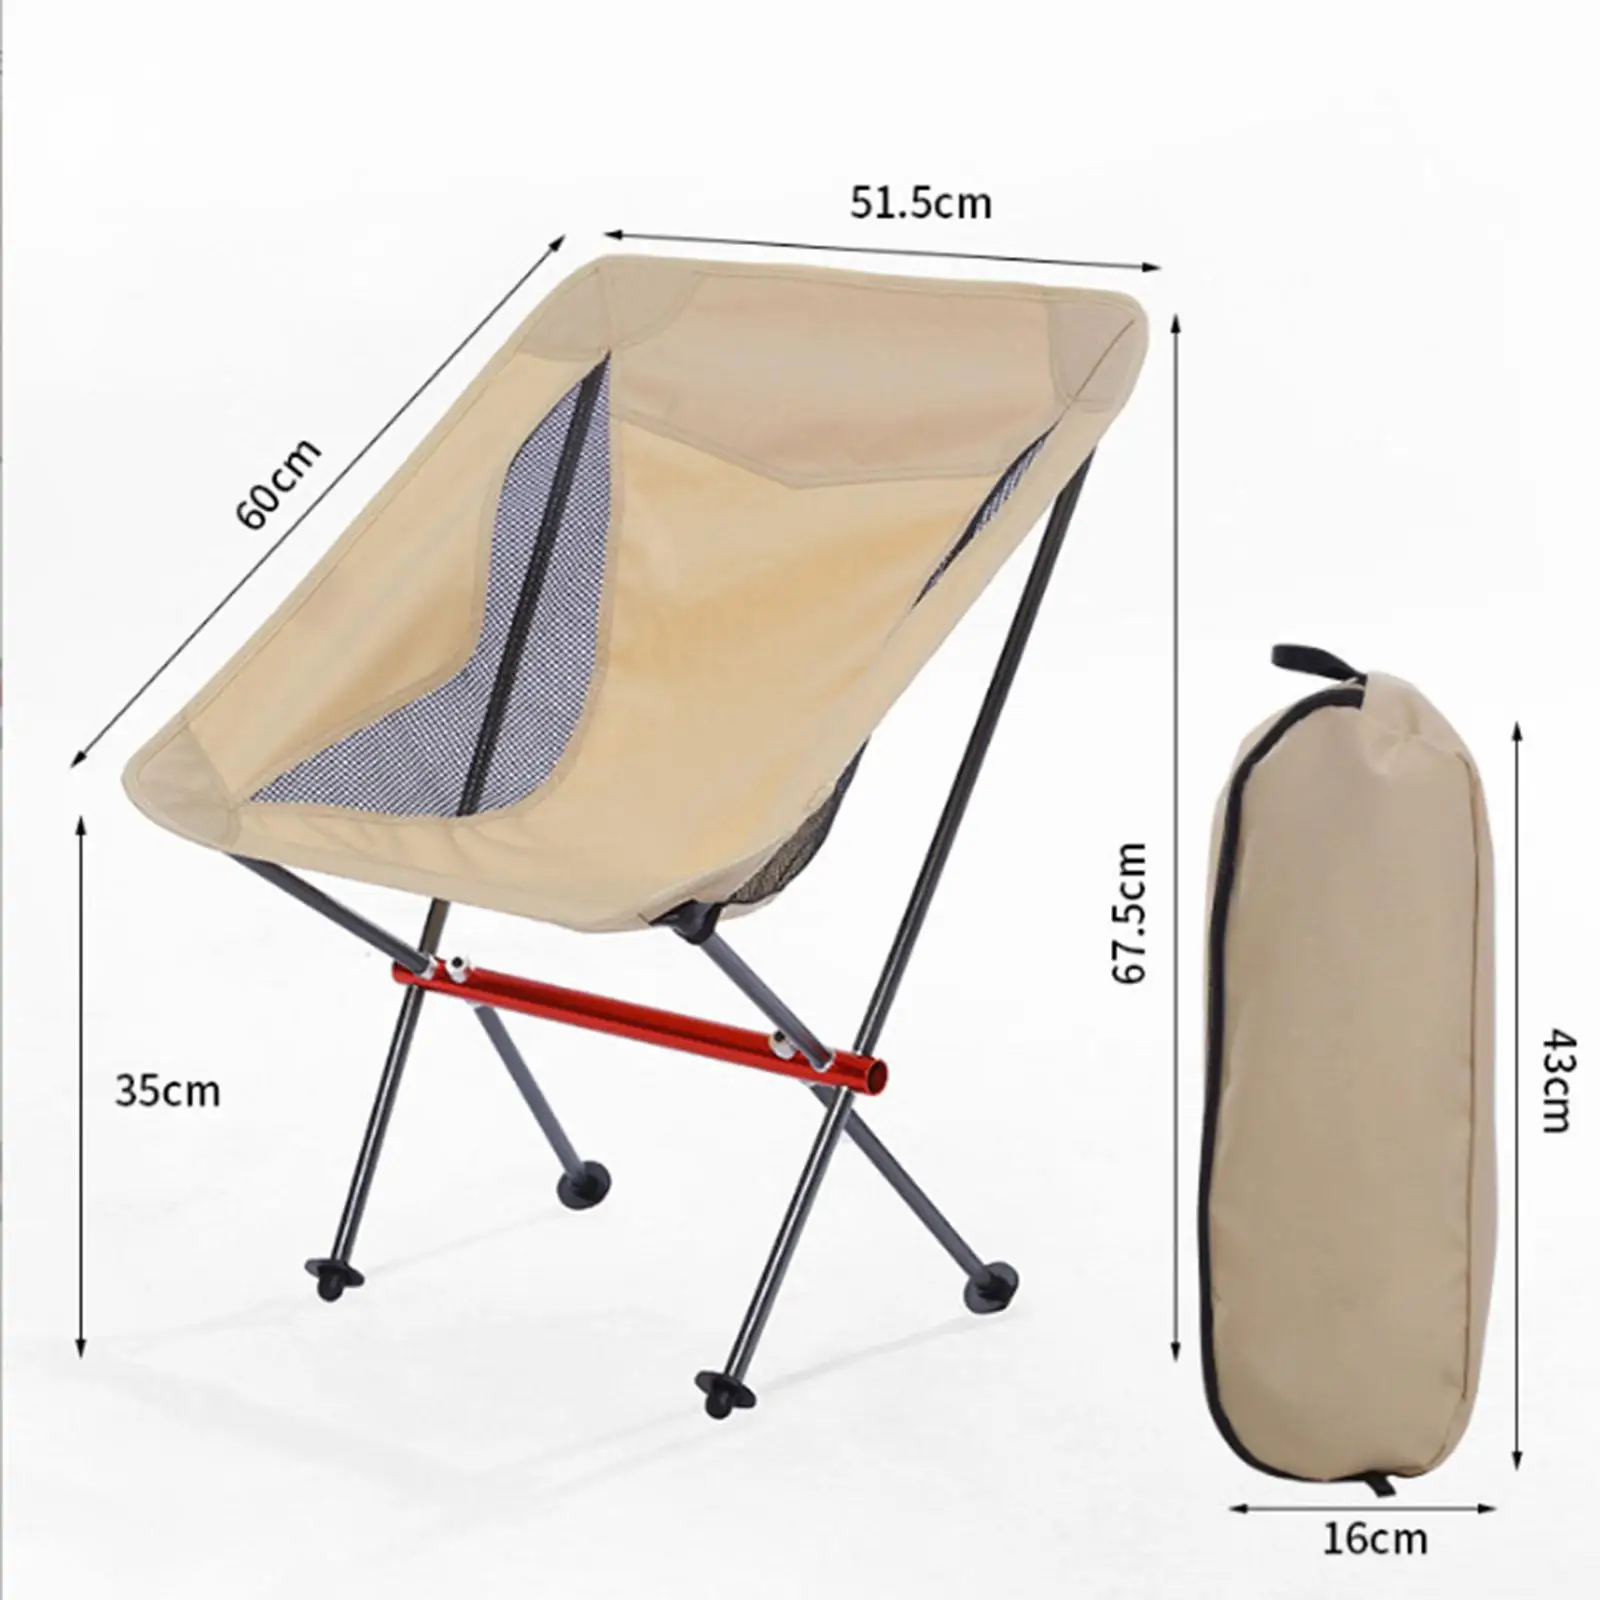 Portable Outdoor Chair for Camping and Picnics - Lightweight Foldable Design